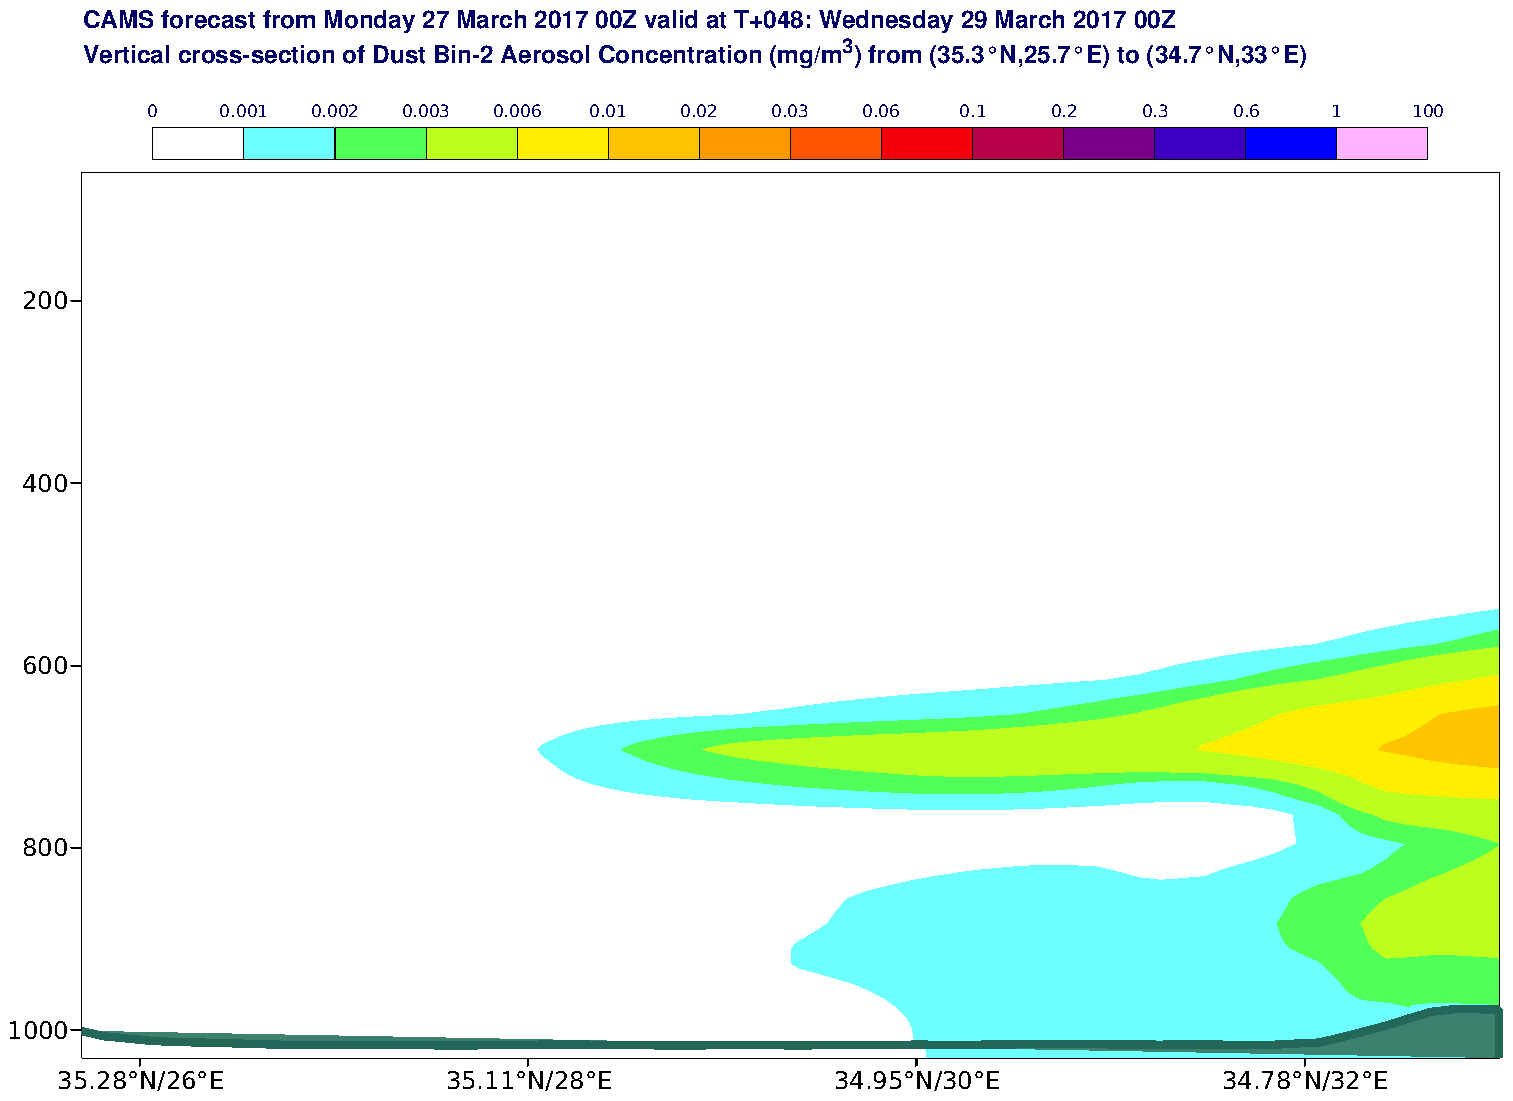 Vertical cross-section of Dust Bin-2 Aerosol Concentration (mg/m3) valid at T48 - 2017-03-29 00:00